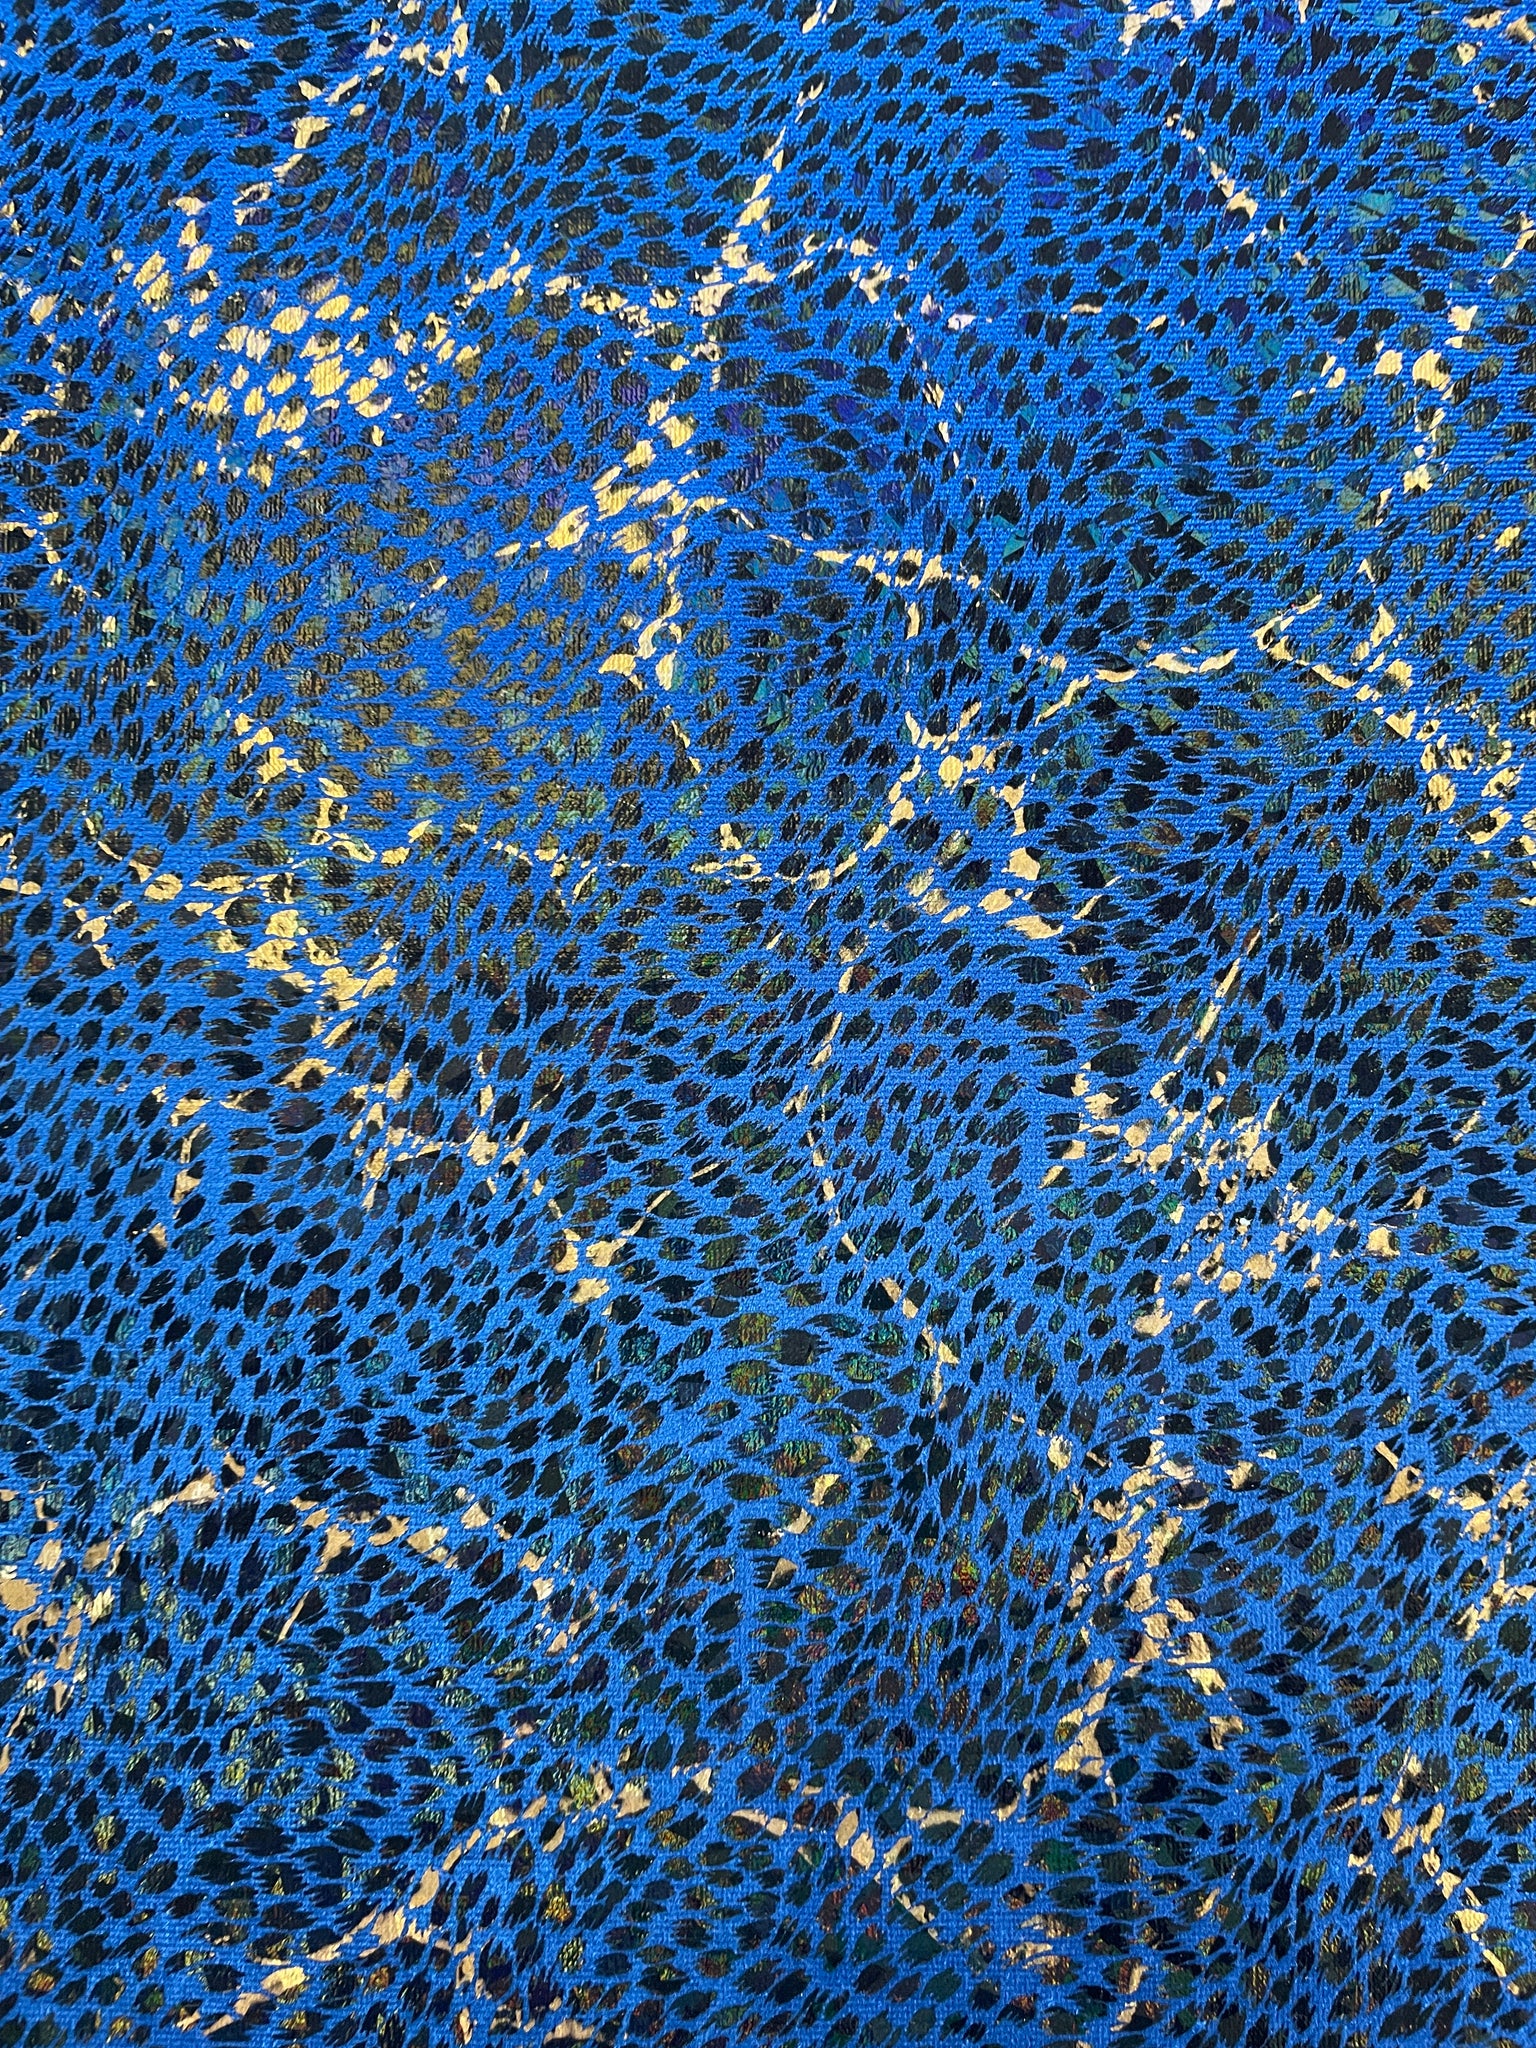 Polyester Panne Velvet - Blue Printed with Metallic Gold and Rainbow Holographic